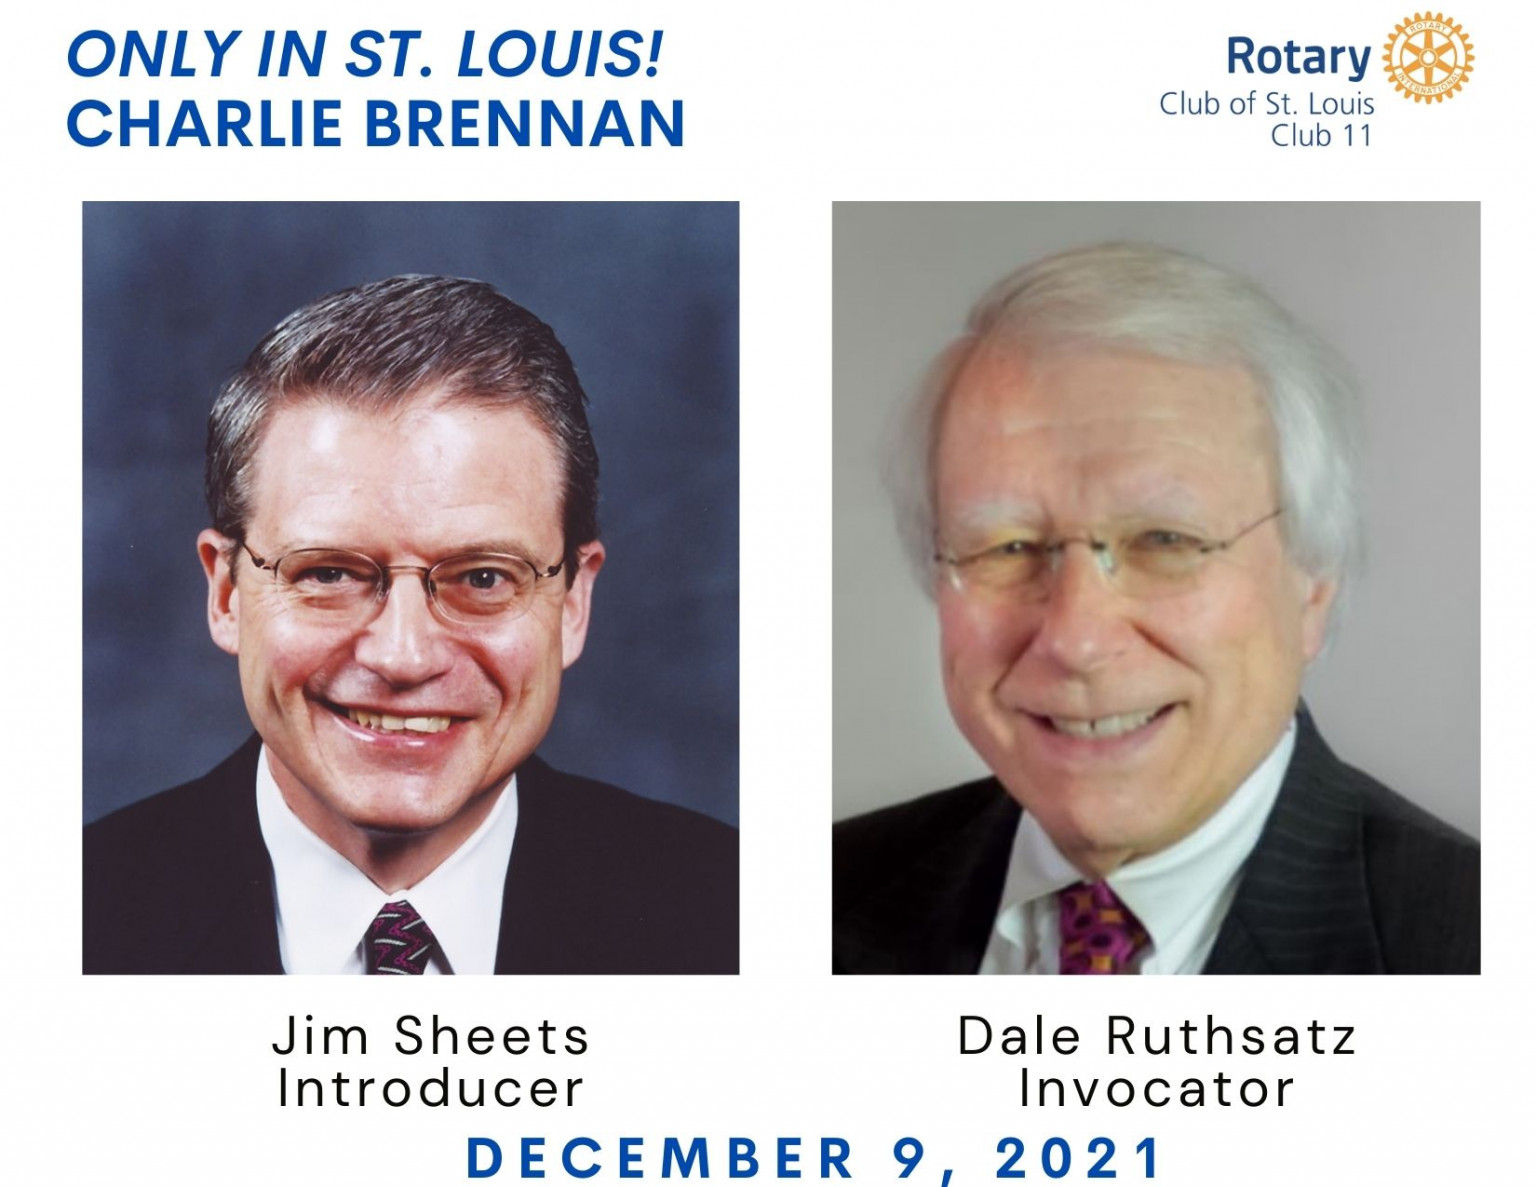 St. Louis Rotary Program Introducer, Jim Sheets and Invocator Dale Ruthsatz, Dec 9th - Charlie Brennan, "Only in St. Louis!"